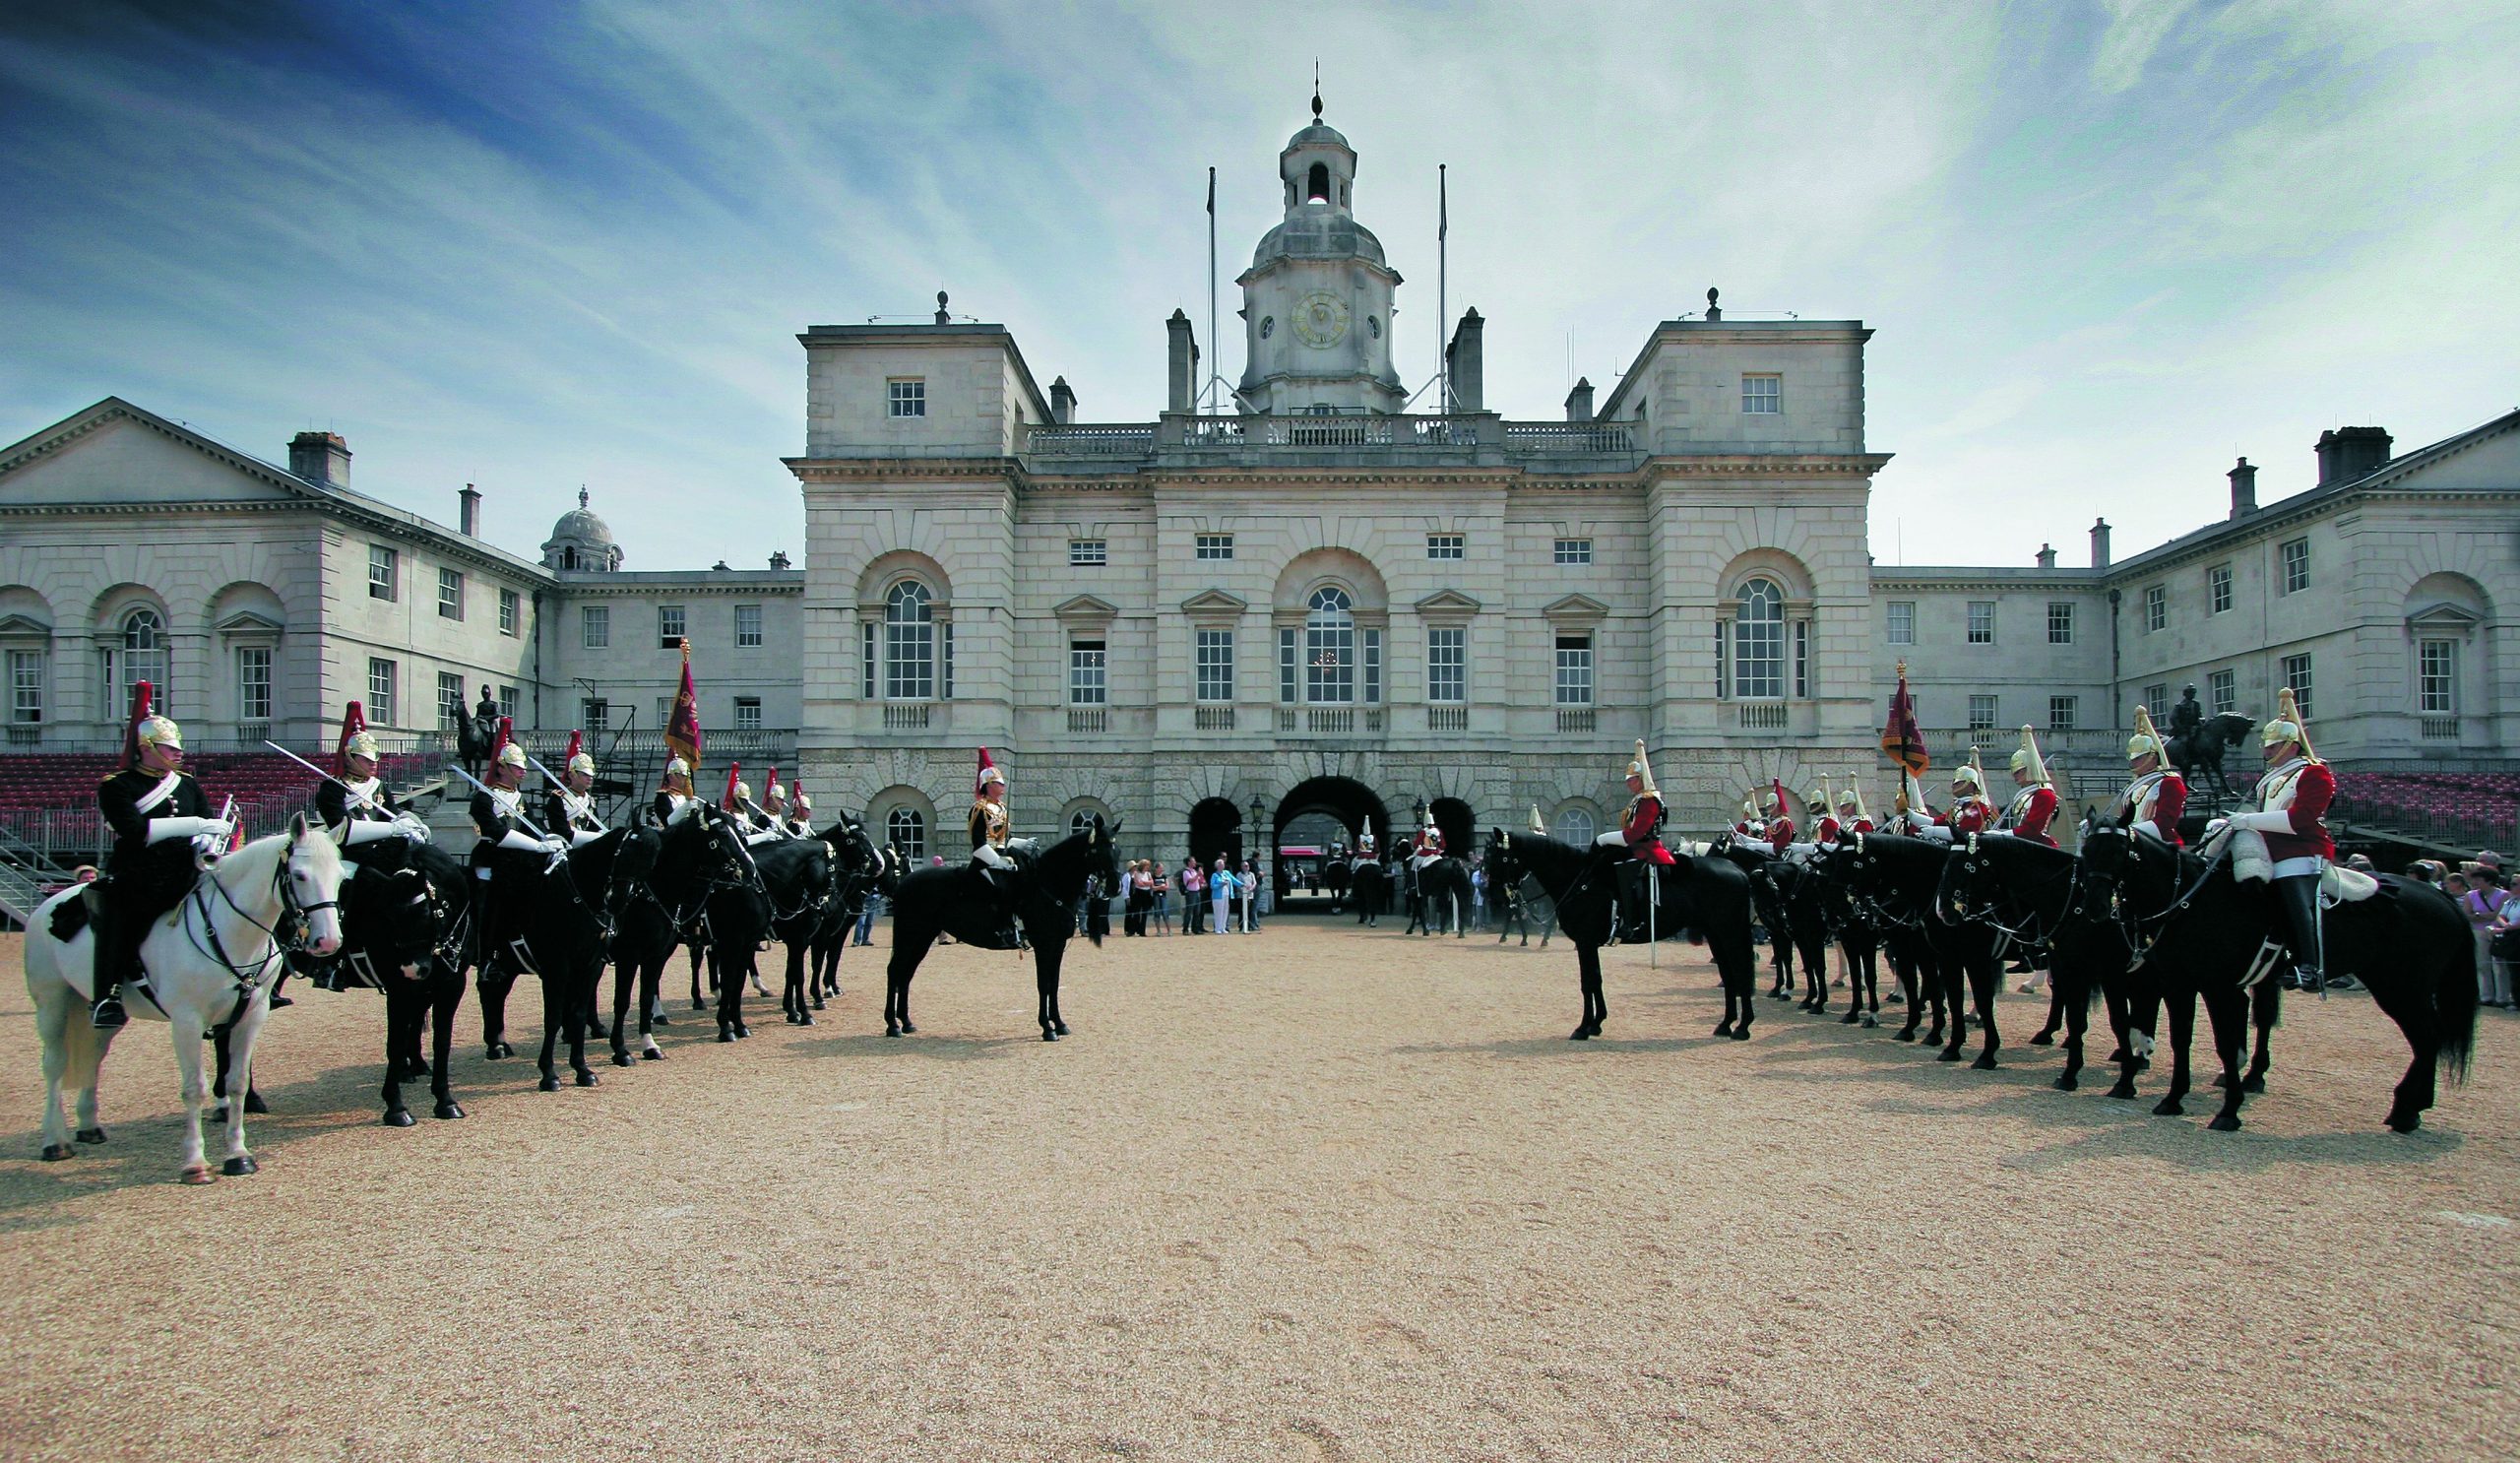 Watch the ceremony on Horse Guards Parade...